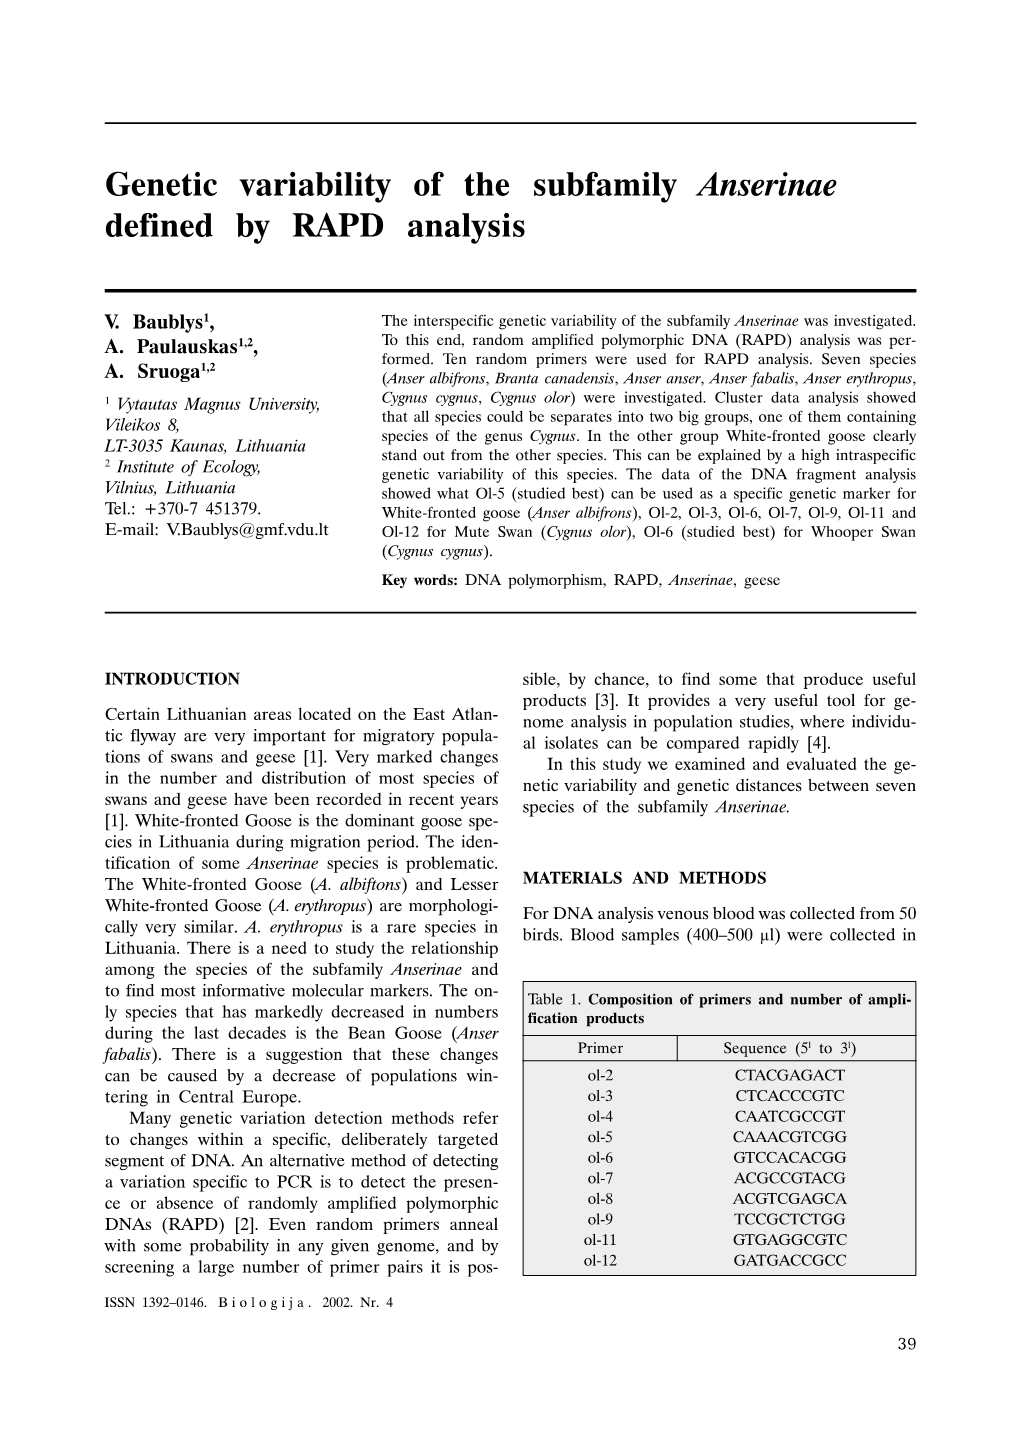 Genetic Variability of the Subfamily Anserinae Defined by RAPD Analysis